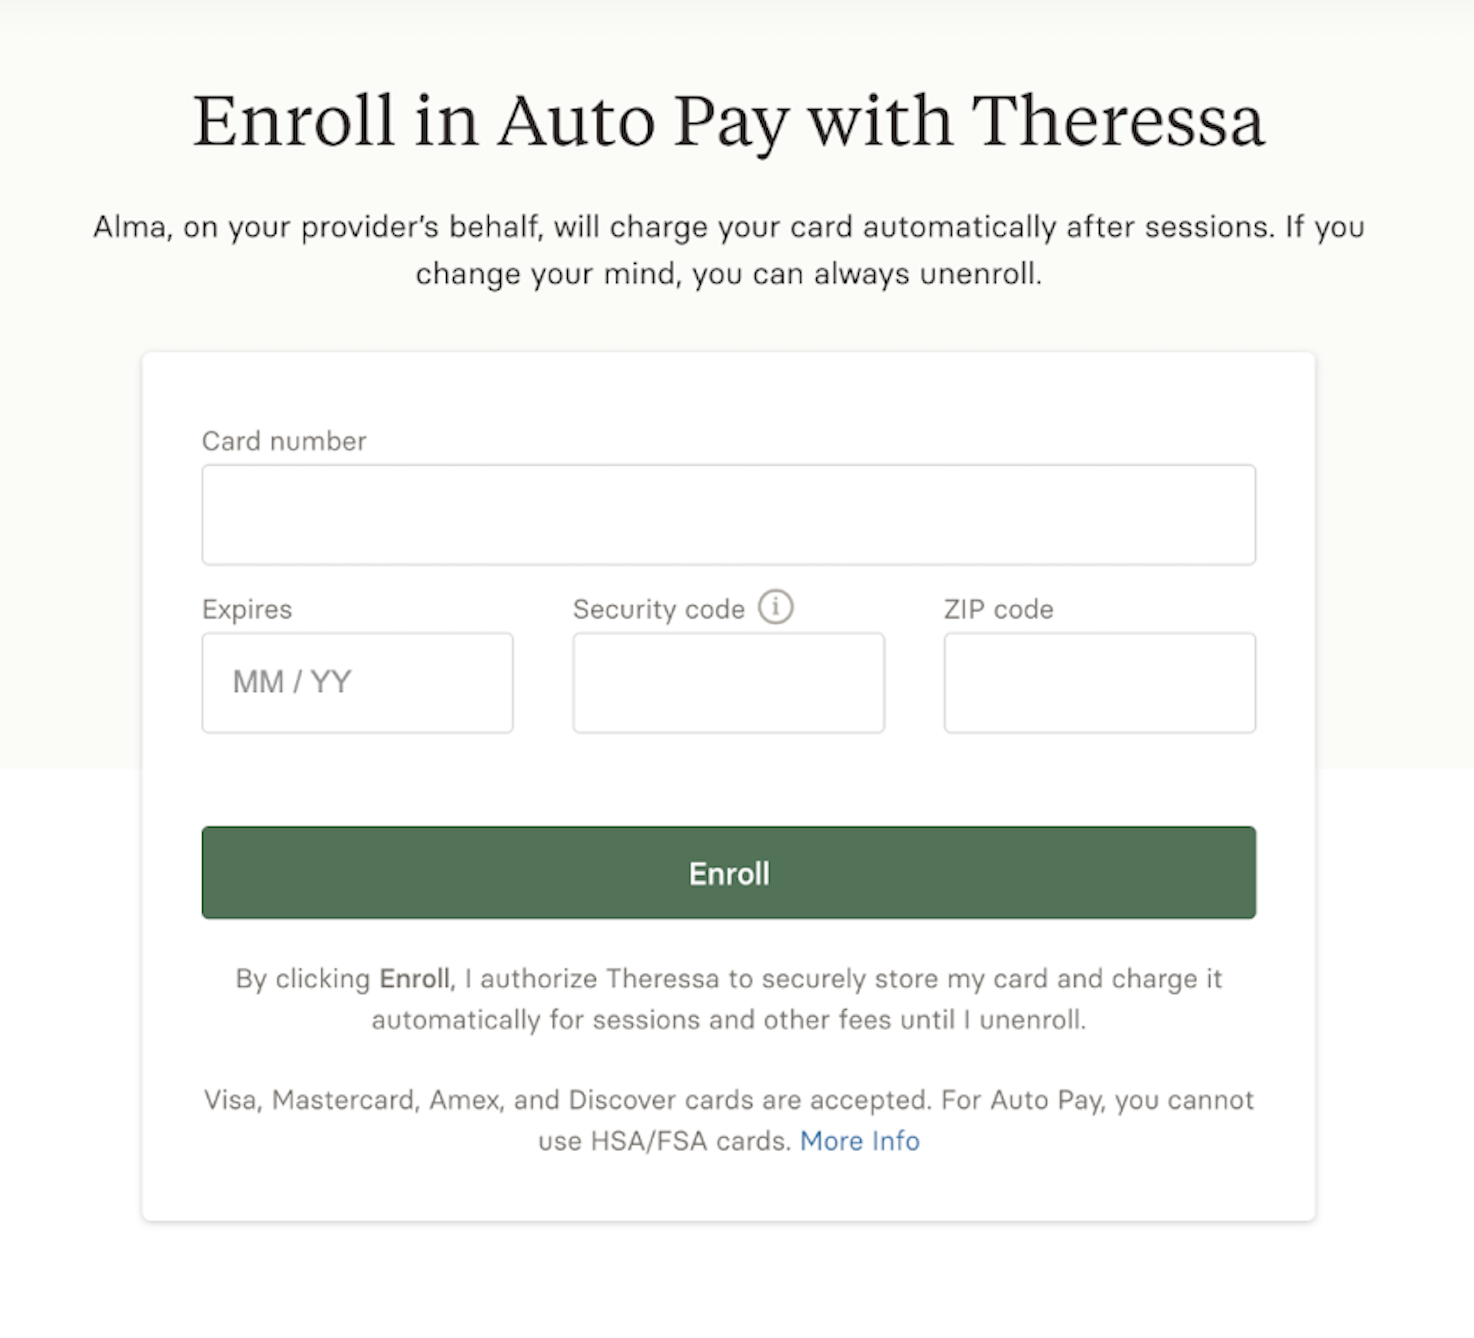 Enroll_in_Auto_Pay.png